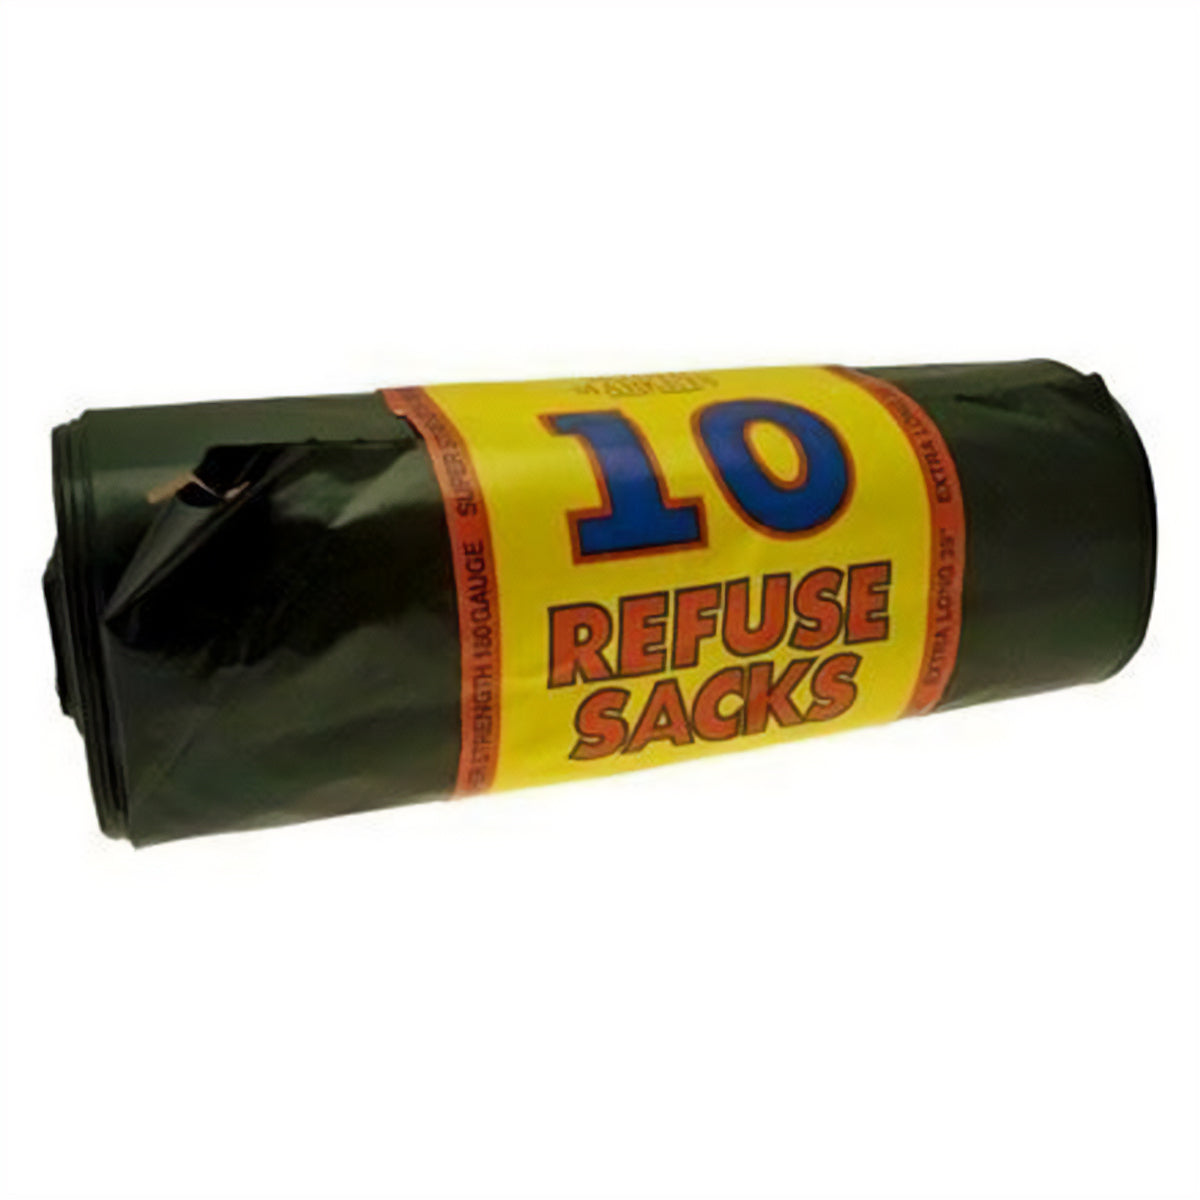 A roll of Royal Markets Refuse Sacks - 10 Pack on a white background.